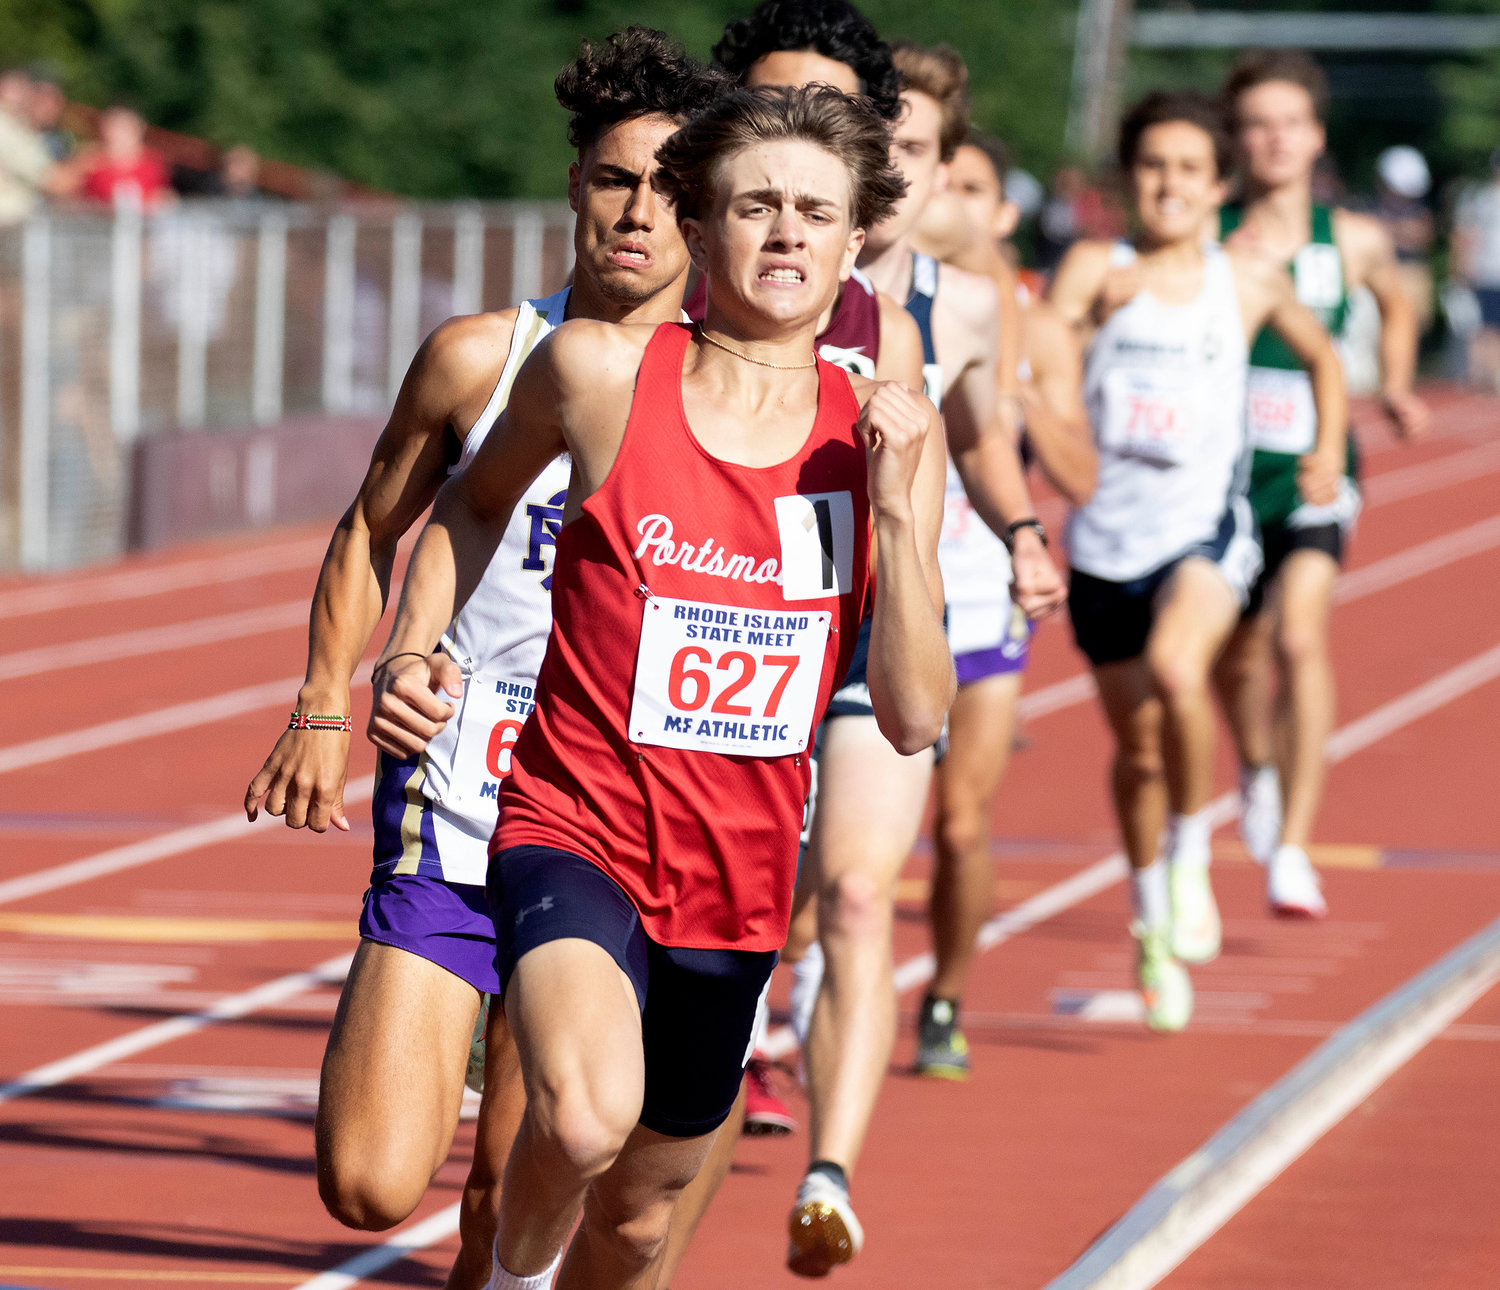 The Patriots’ Kaden Kluth came in second in the 800-meter run with a time of 1:51.49. It was the fastest 800-meter race in the history of the meet.